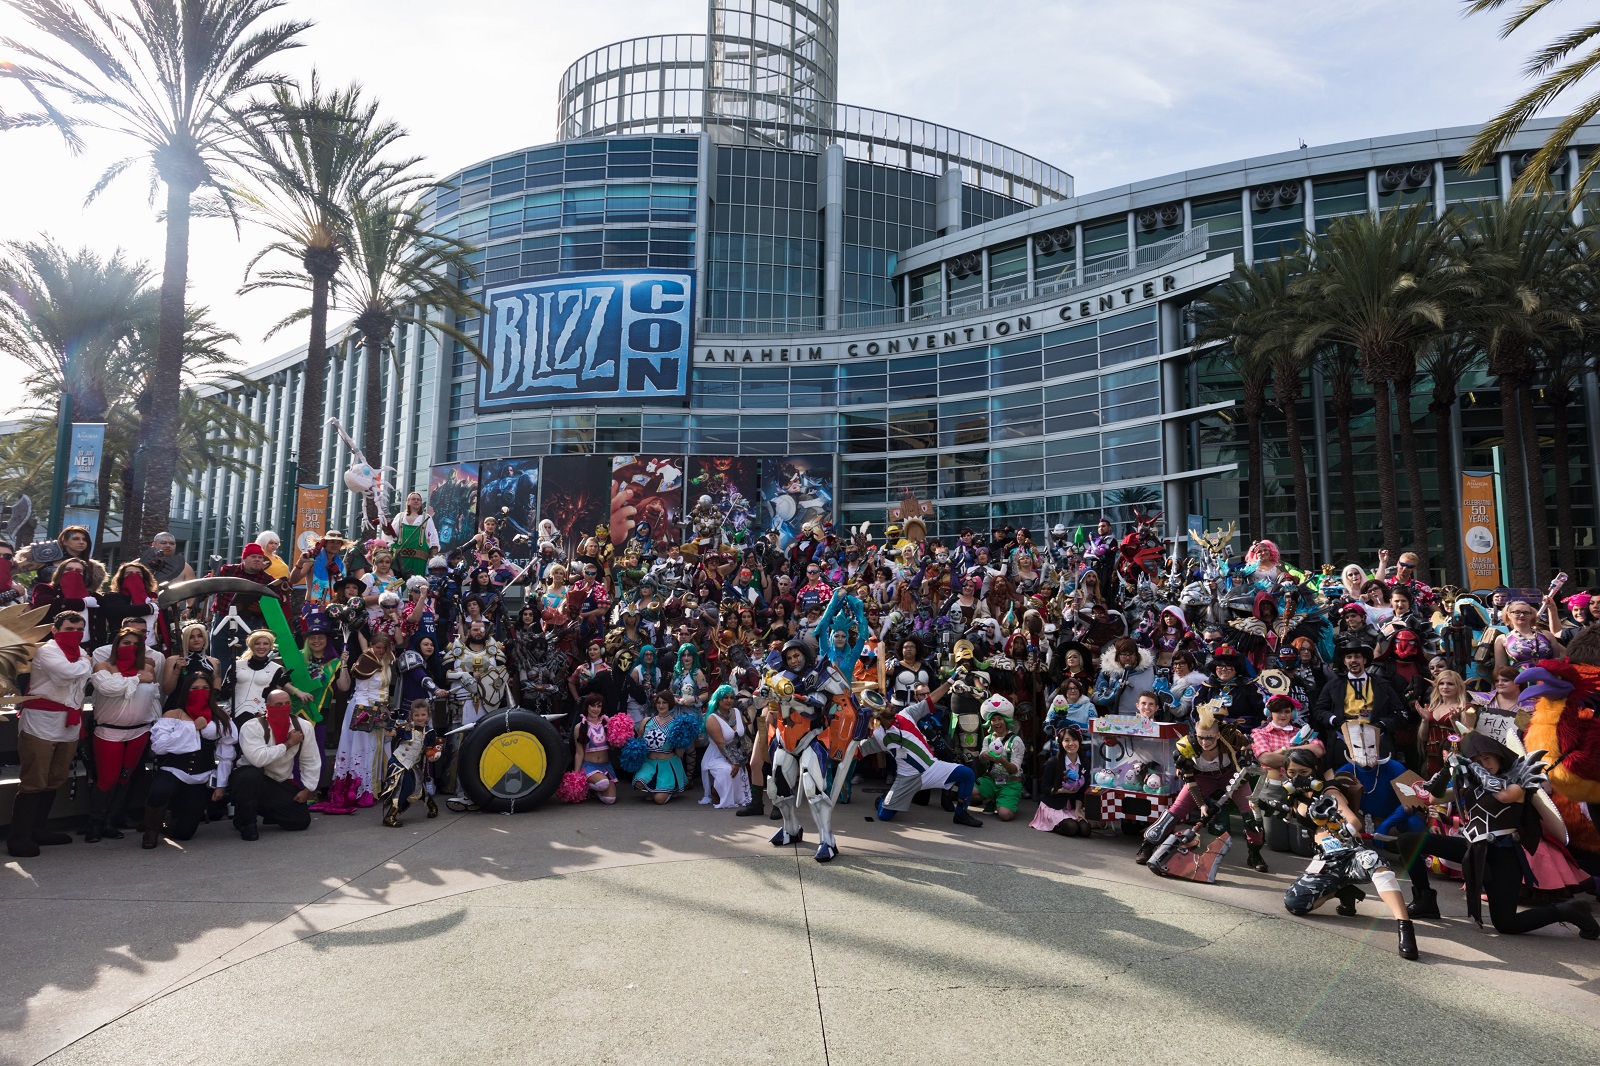 BlizzCon is one of the biggest gaming events of the year, giving gamers everywhere a chance to connect and geek out over their shared passion